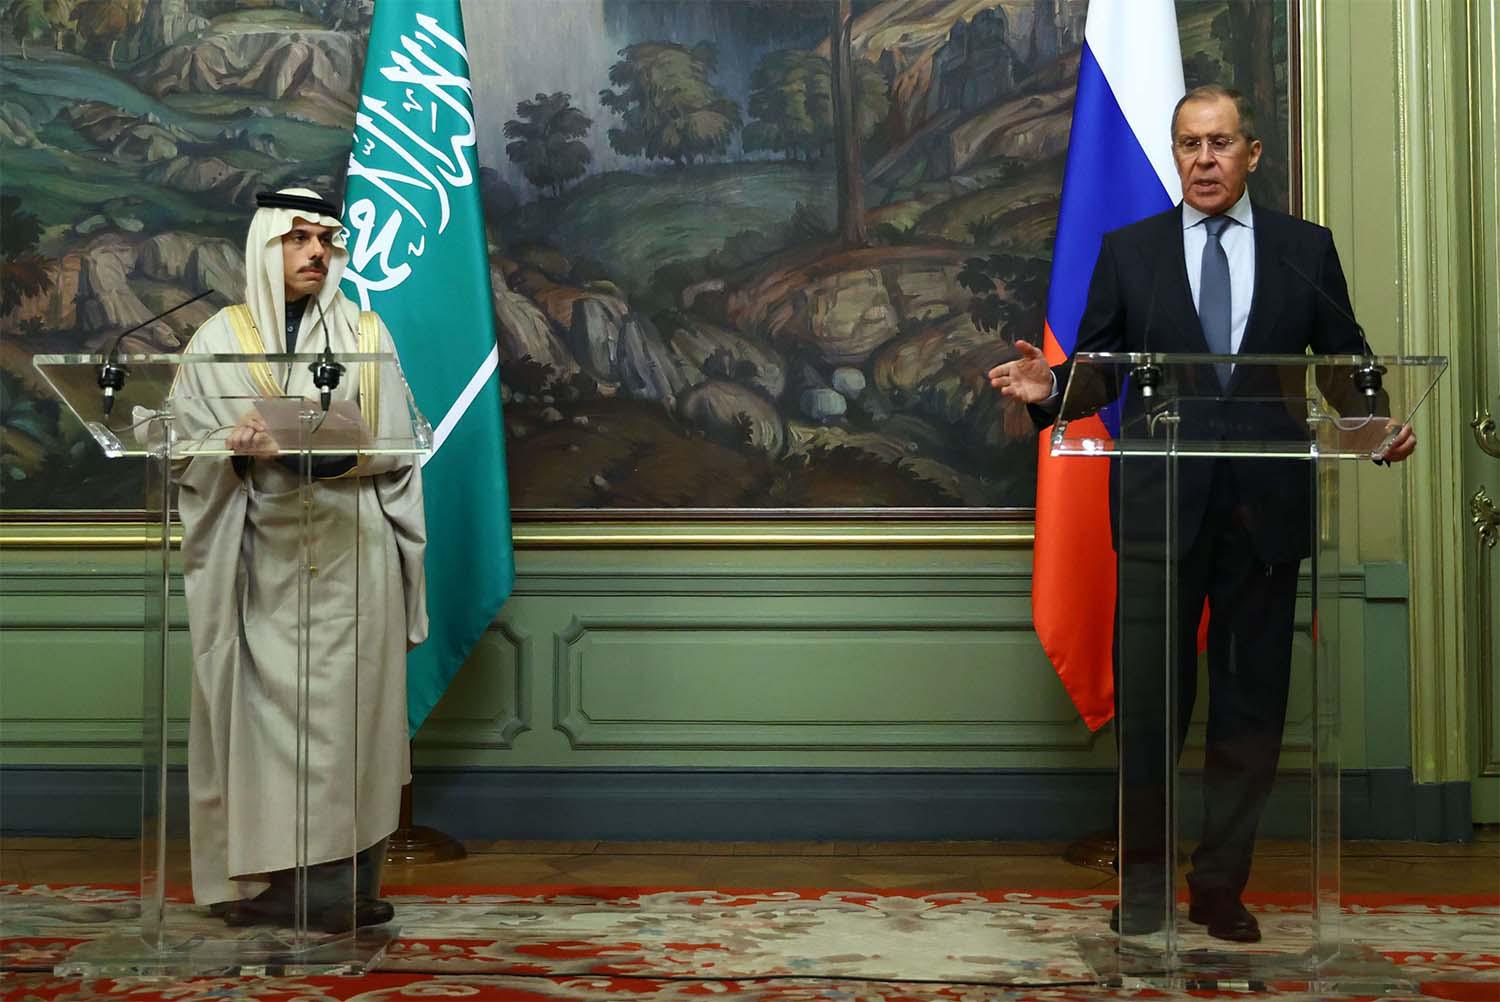 Russian Foreign Minister Sergei Lavrov and his Saudi counterpart Prince Faisal bin Farhan al-Saud hold a joint press conference following their meeting in Moscow